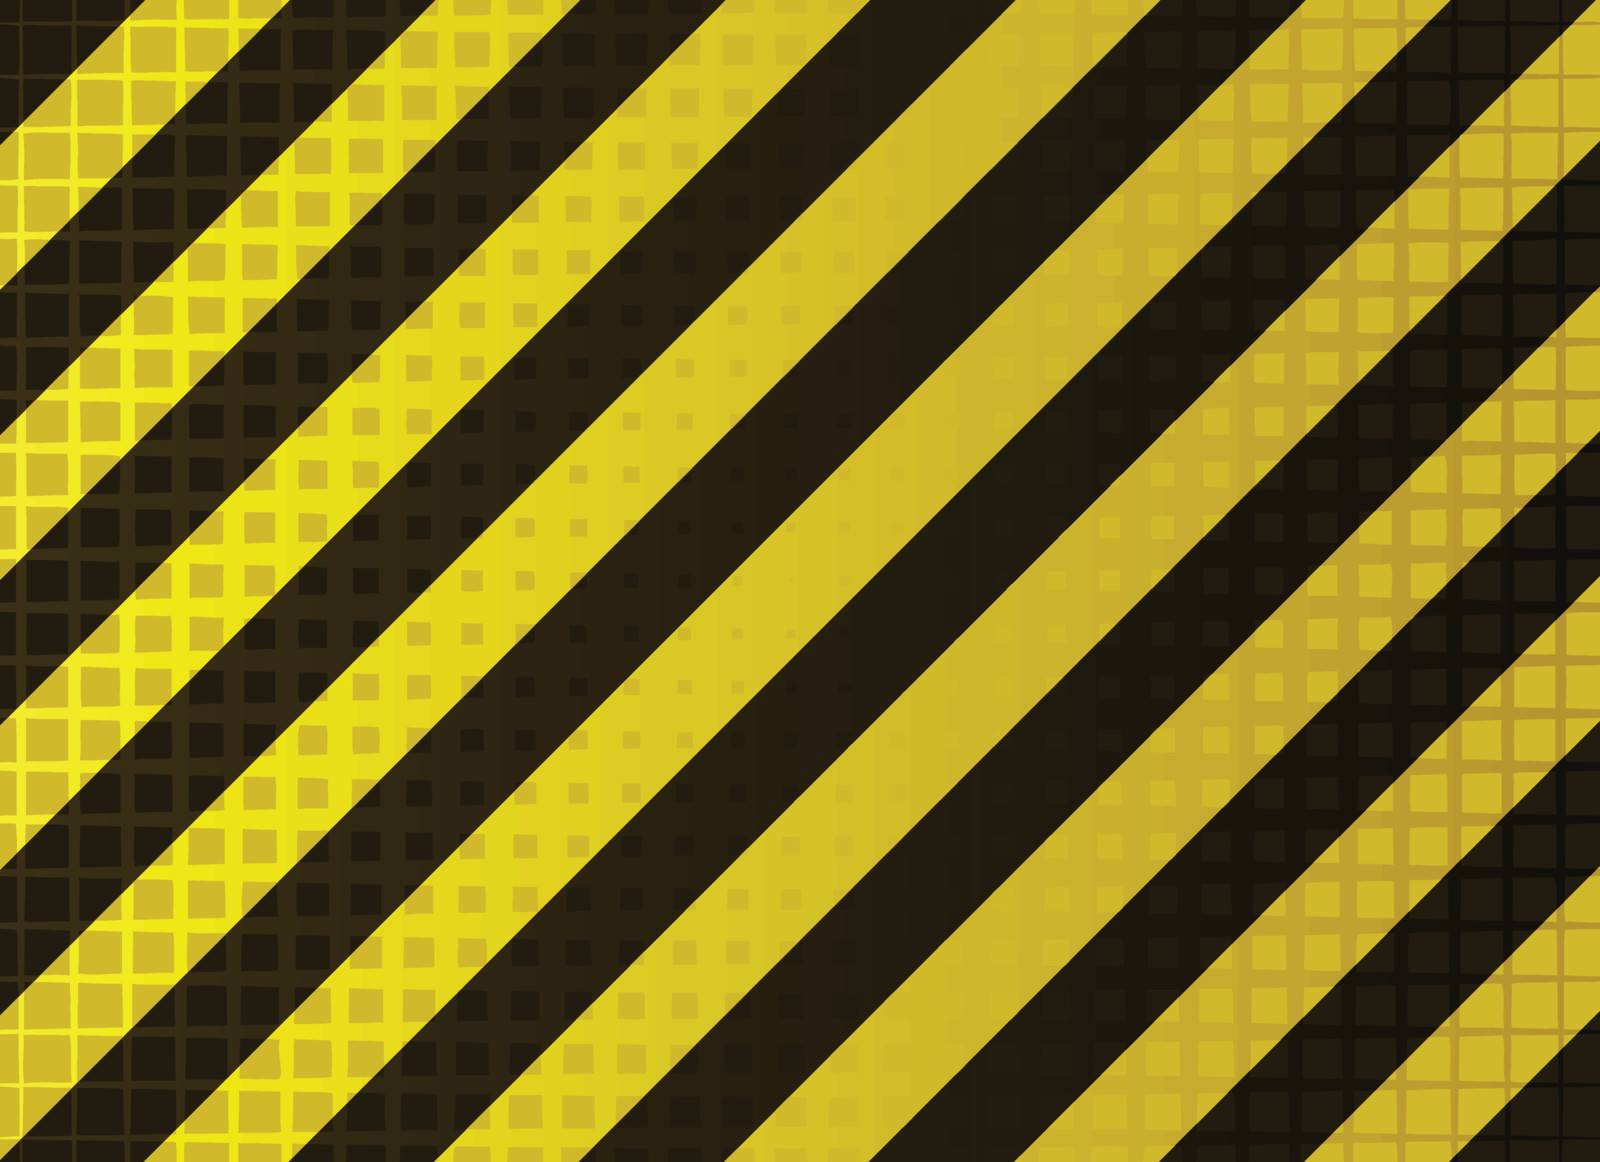 vector illustration of  grungy hazard stripes in dark yellow and black colors
